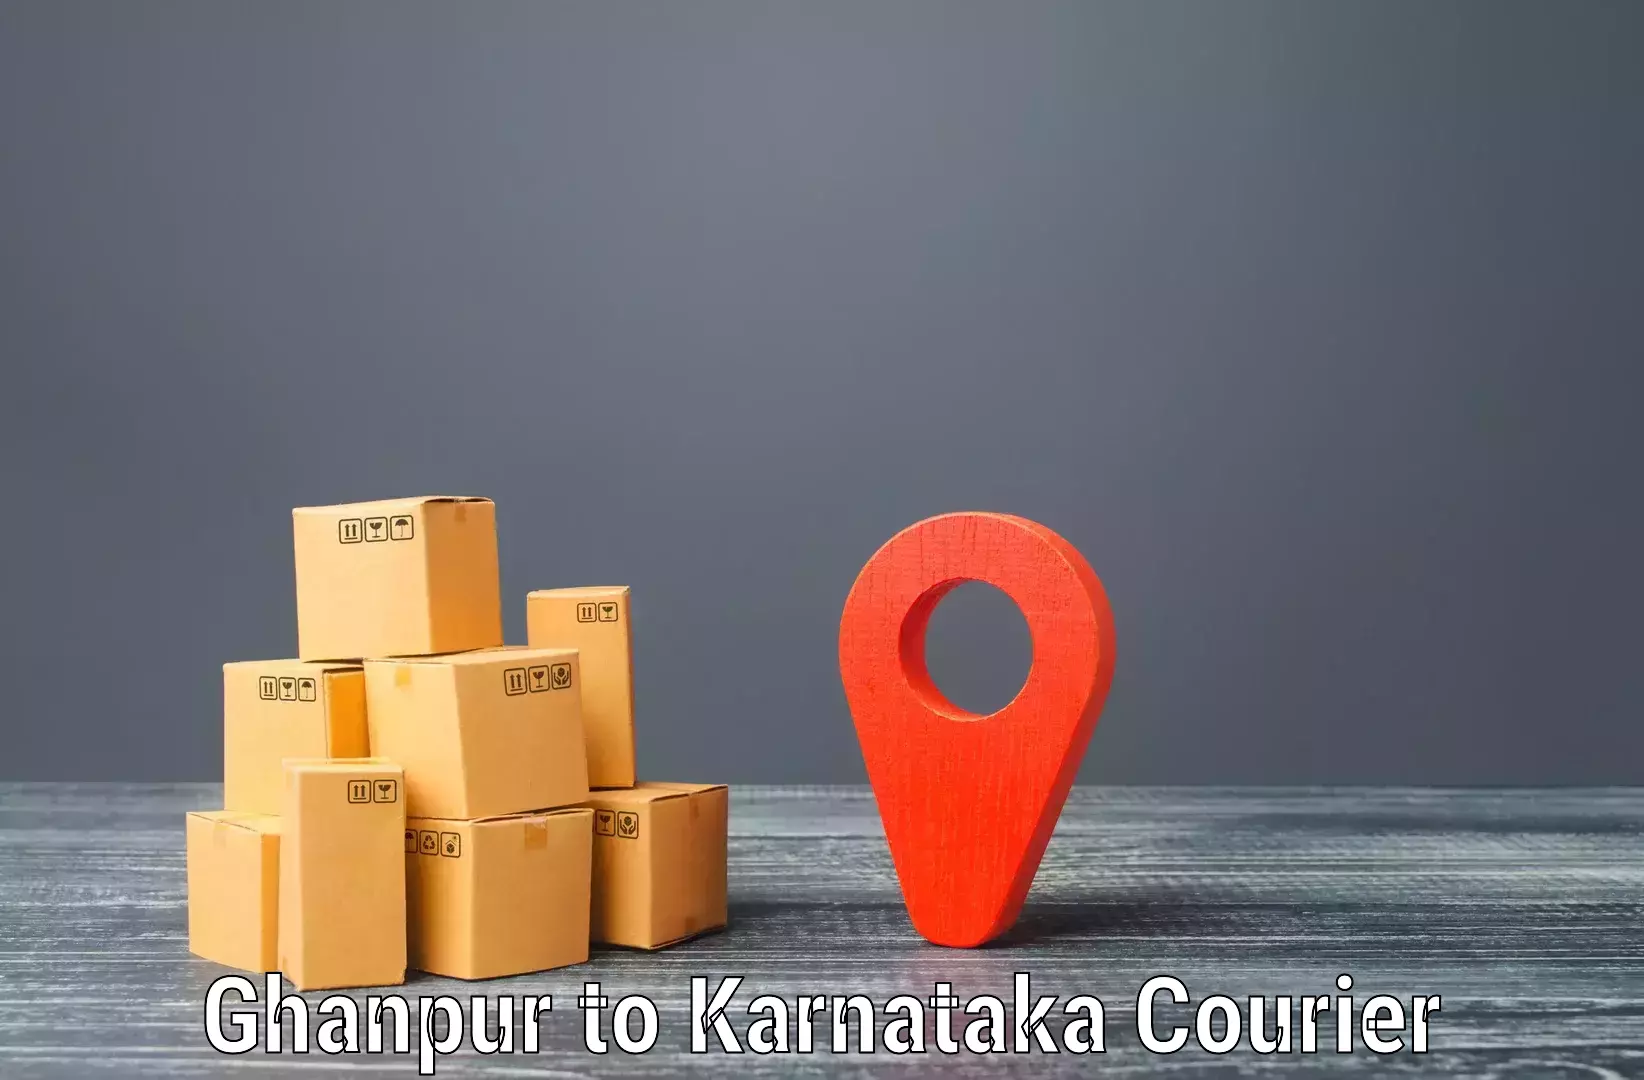 Tech-enabled shipping Ghanpur to Hubli